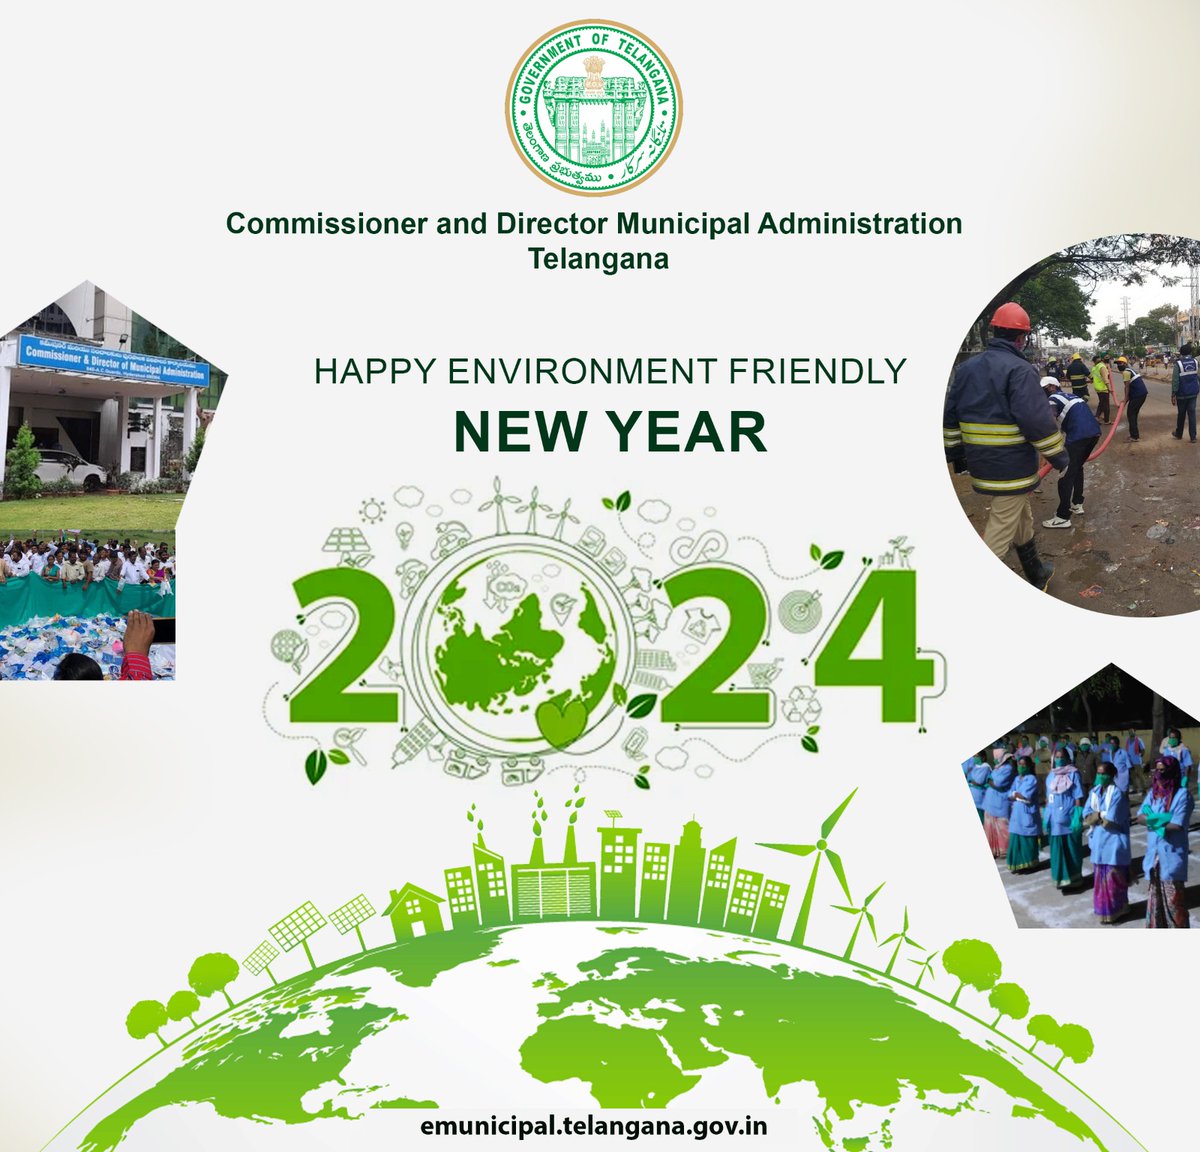 Let's sprout into a greener 2024! Wishing you a Happy 2024 filled with flourishing resolutions and blooming environmental awareness. #GreenNewYear ♻️ #HappyNewYear2024 @harichandanaias